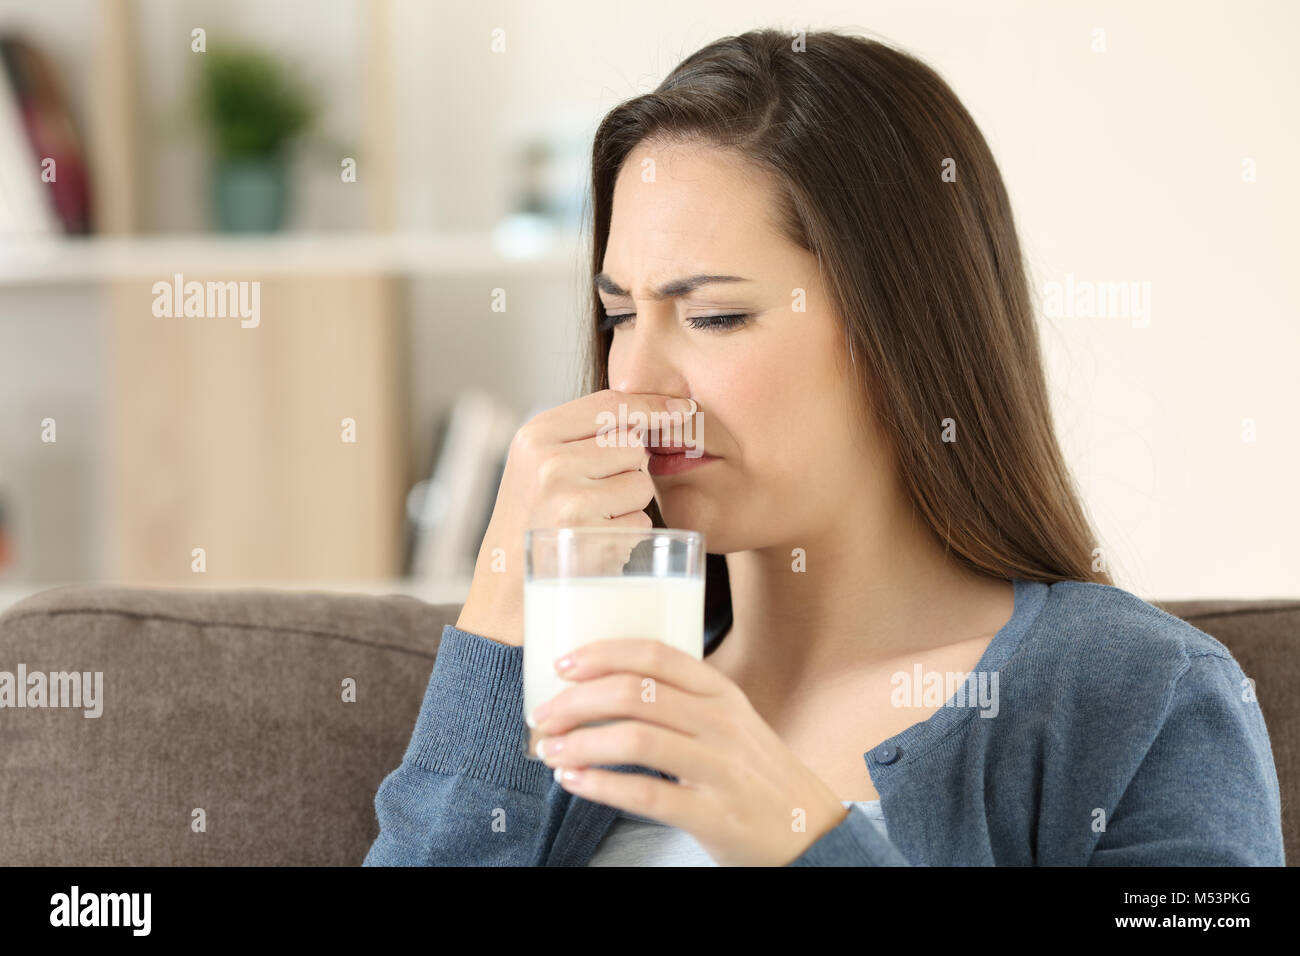 Disgusted woman holding a milk glass with bad odor sitting on a couch in the living room at home Stock Photo